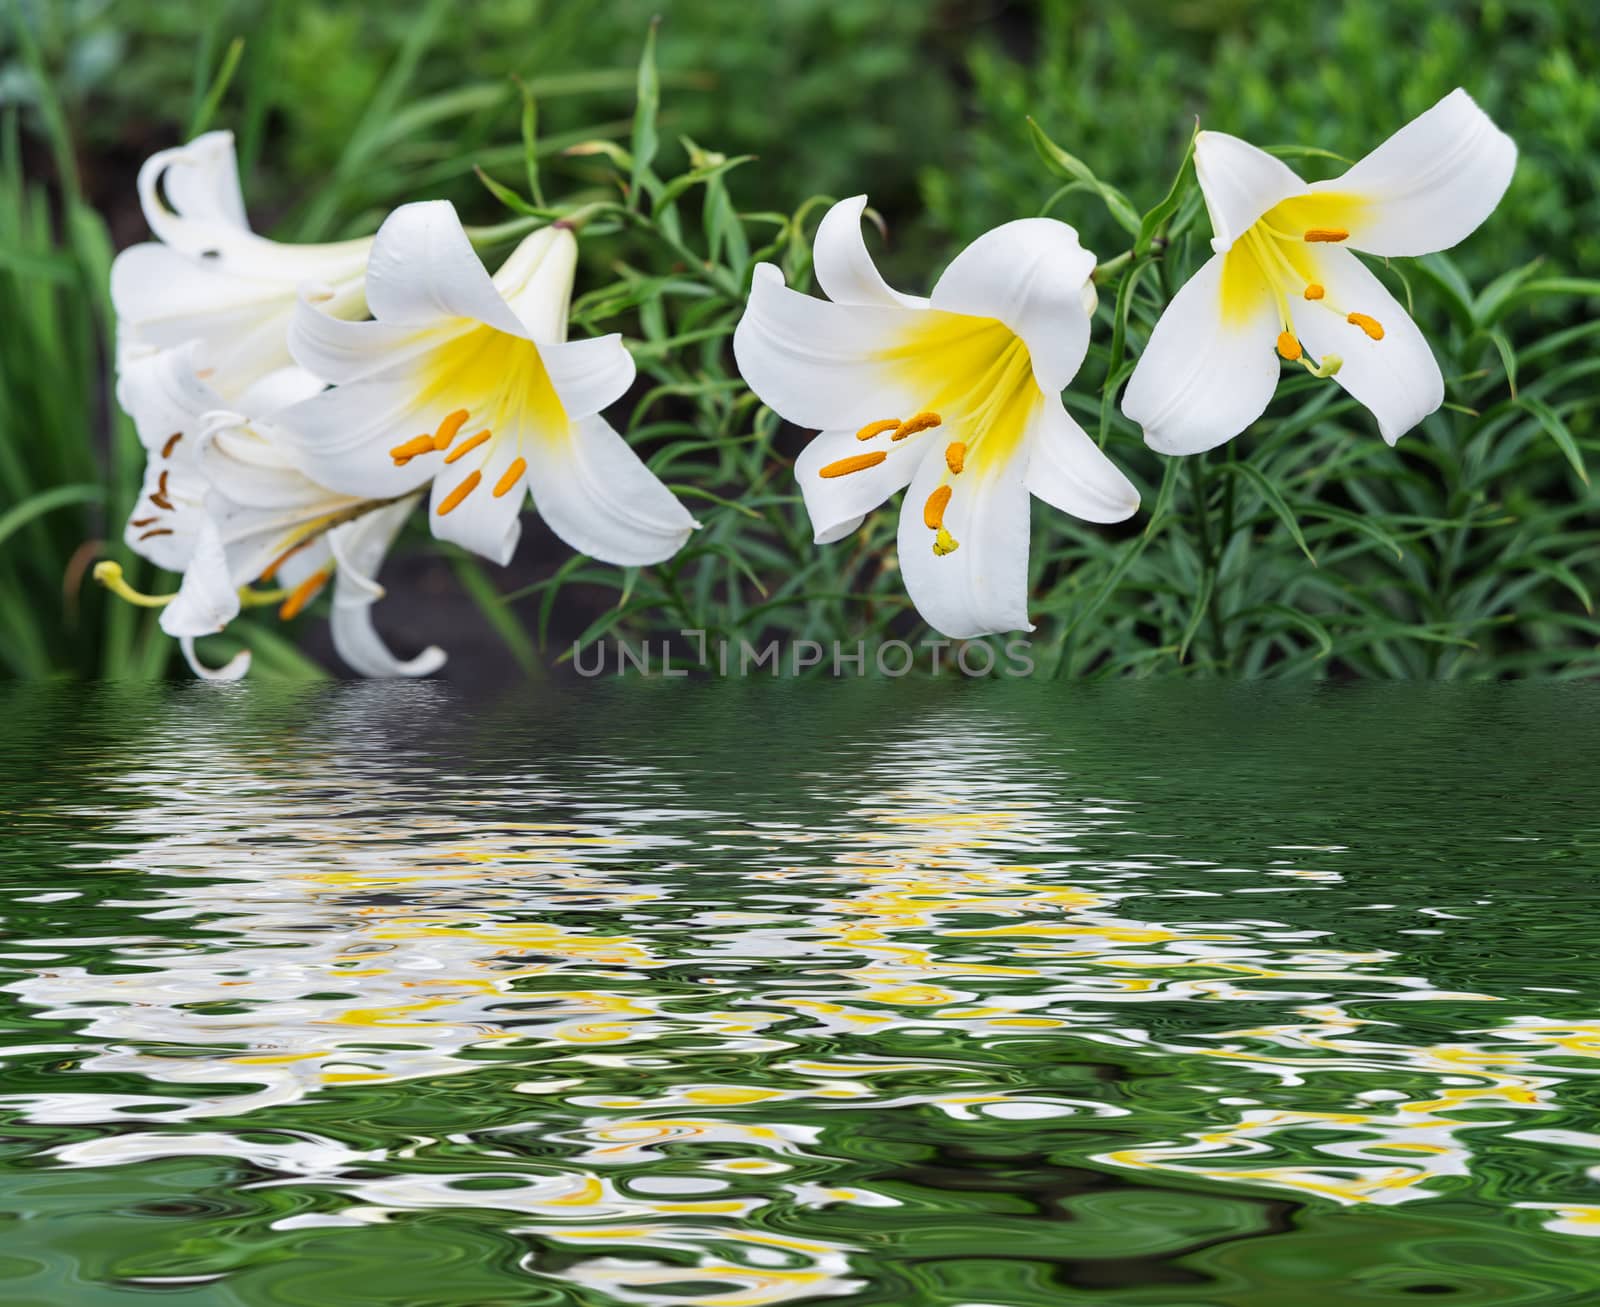 Several large flowers of beautiful white tubular lilies outdoors reflected in a water surface with small waves